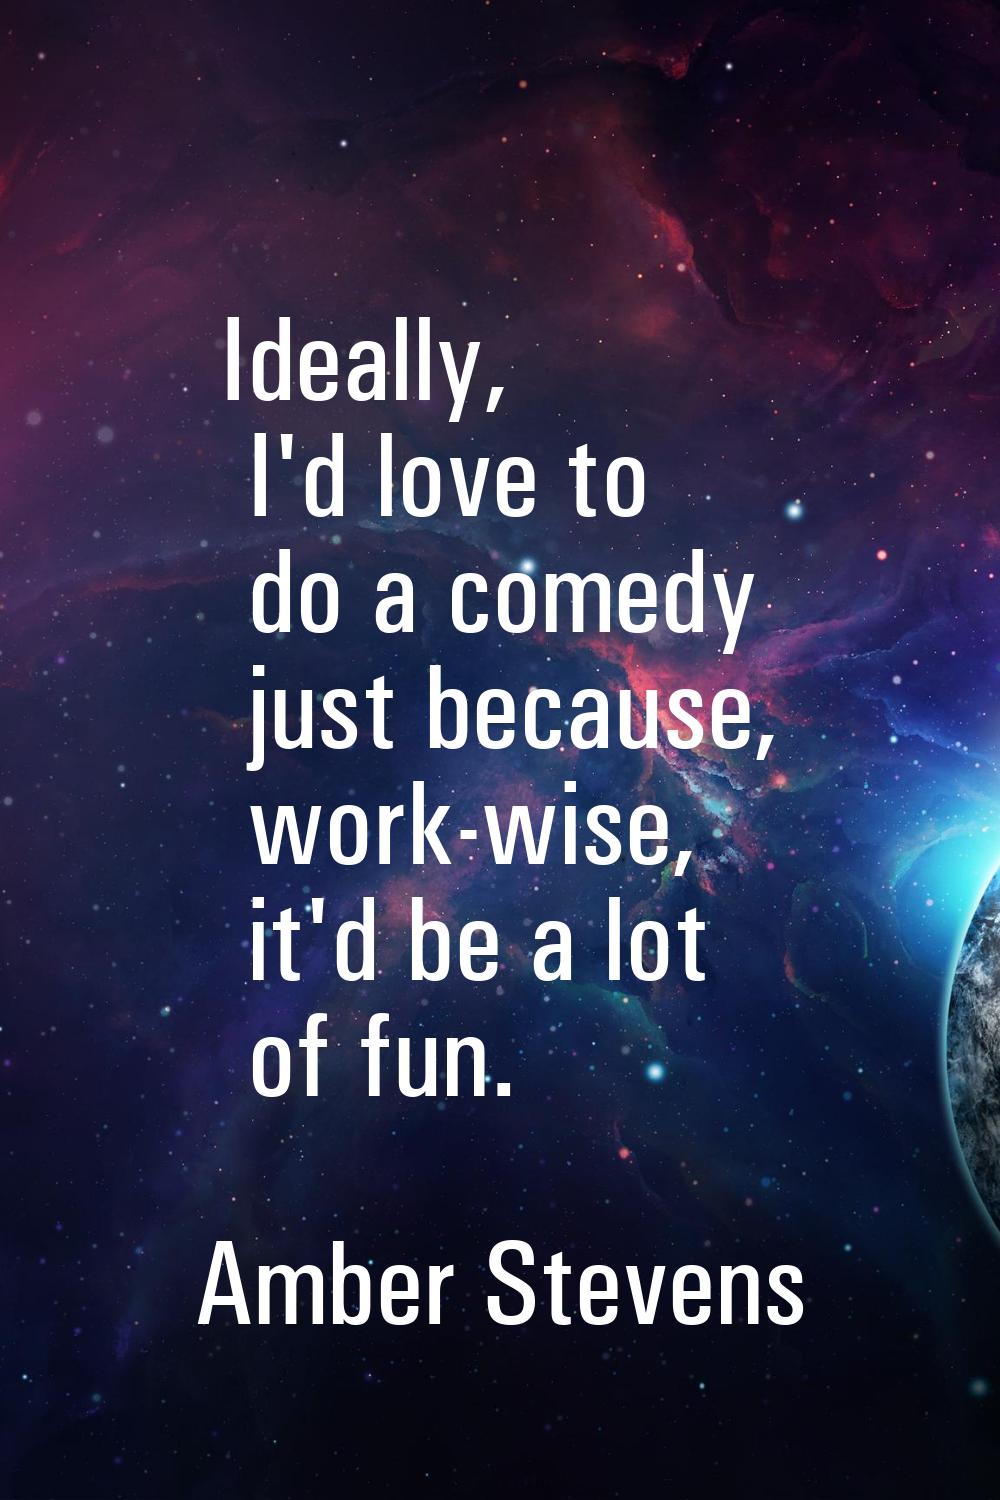 Ideally, I'd love to do a comedy just because, work-wise, it'd be a lot of fun.